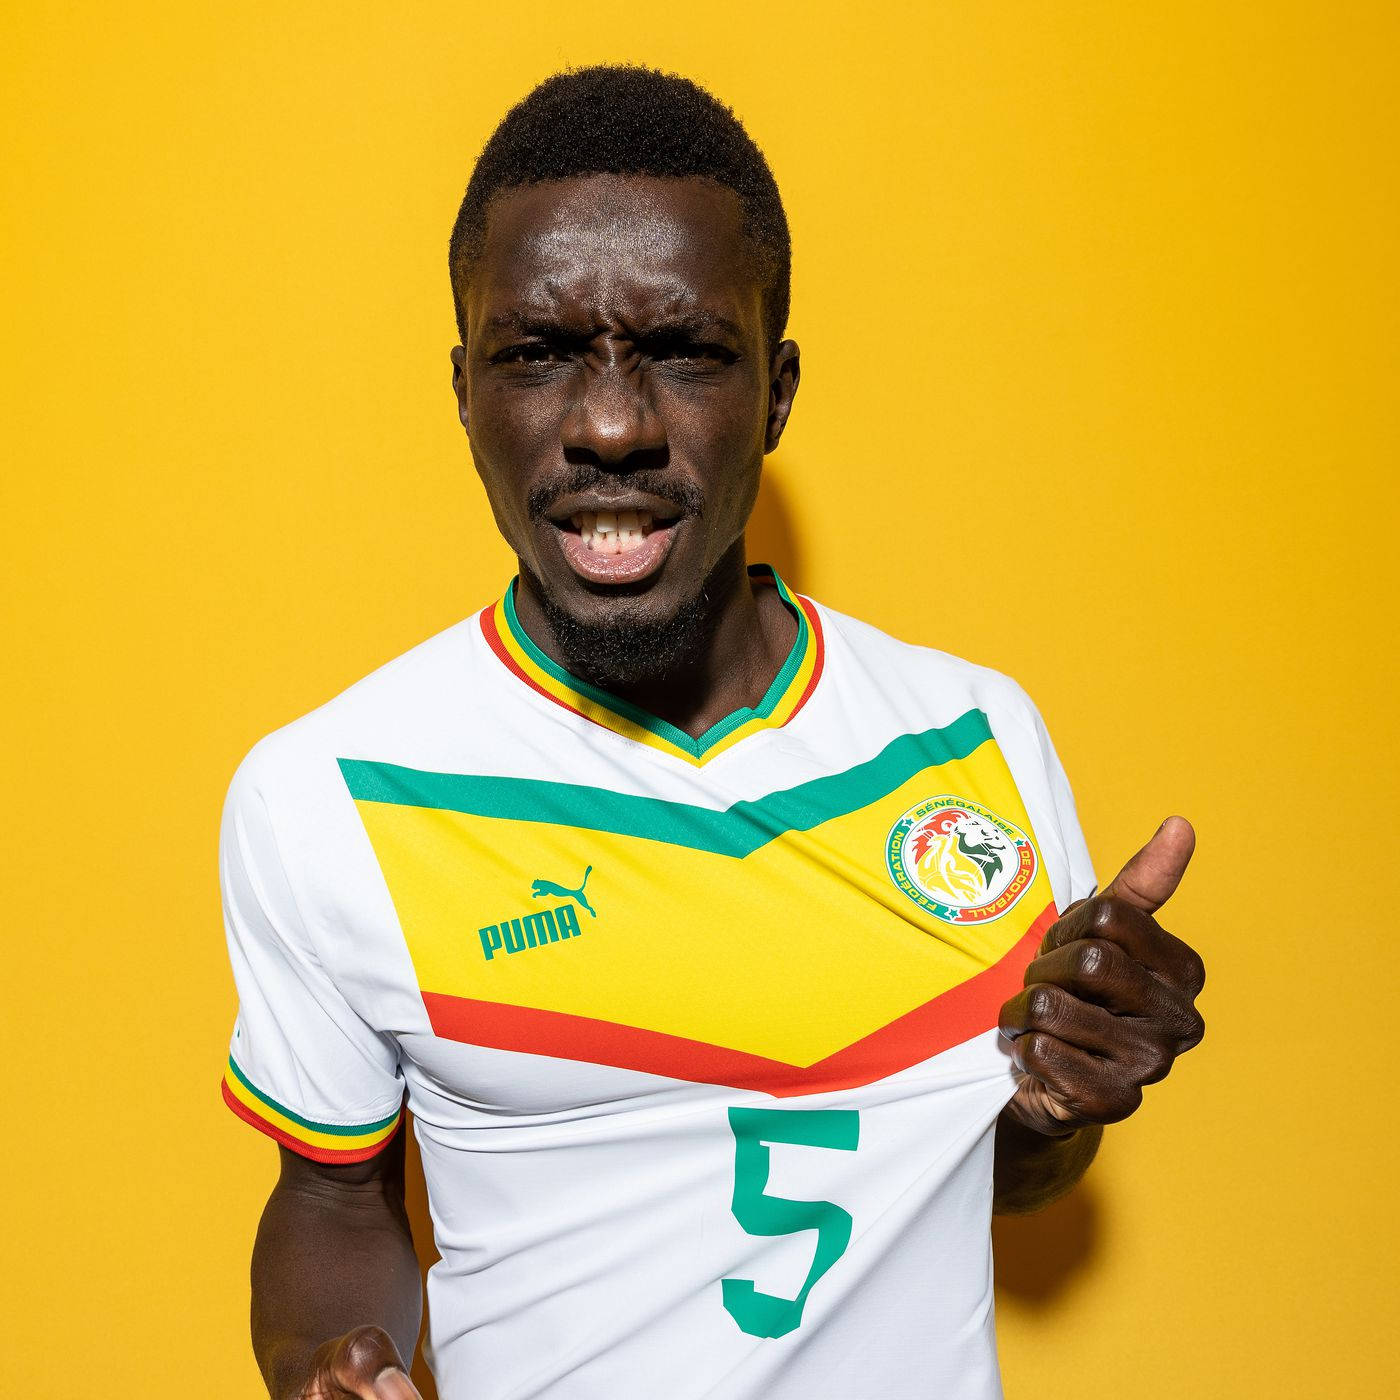 Top 999+ Senegal National Football Team Wallpapers Full HD, 4K✅Free to Use